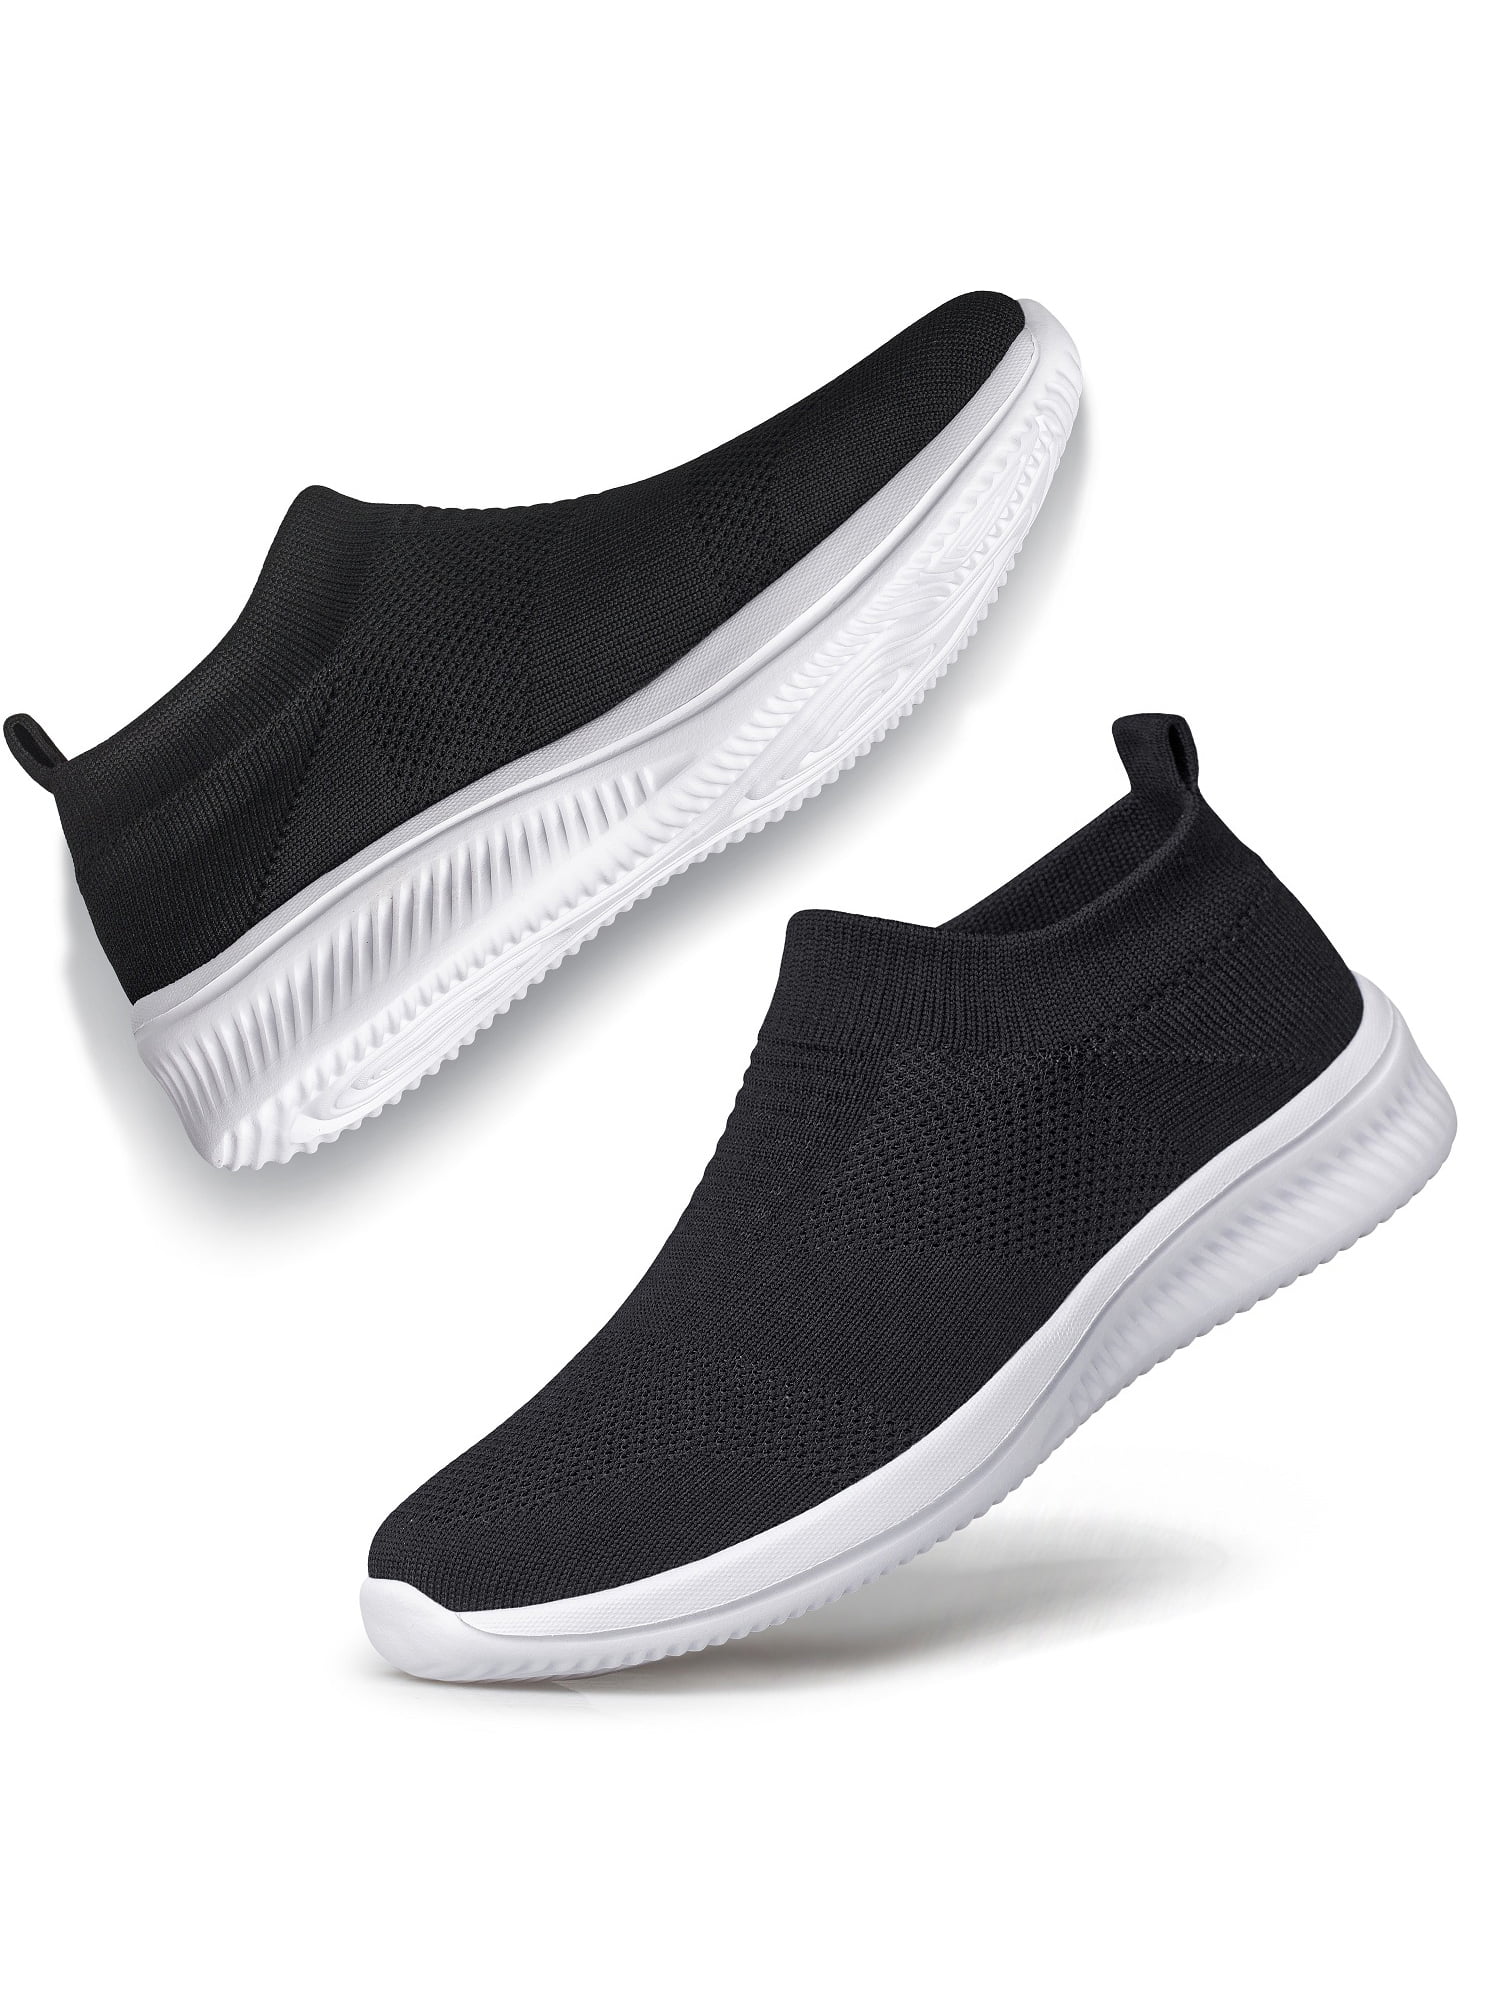 ADQ Men's Slip on Shoes Casual Shoes Lightweight Breathable Anti-Slip ...